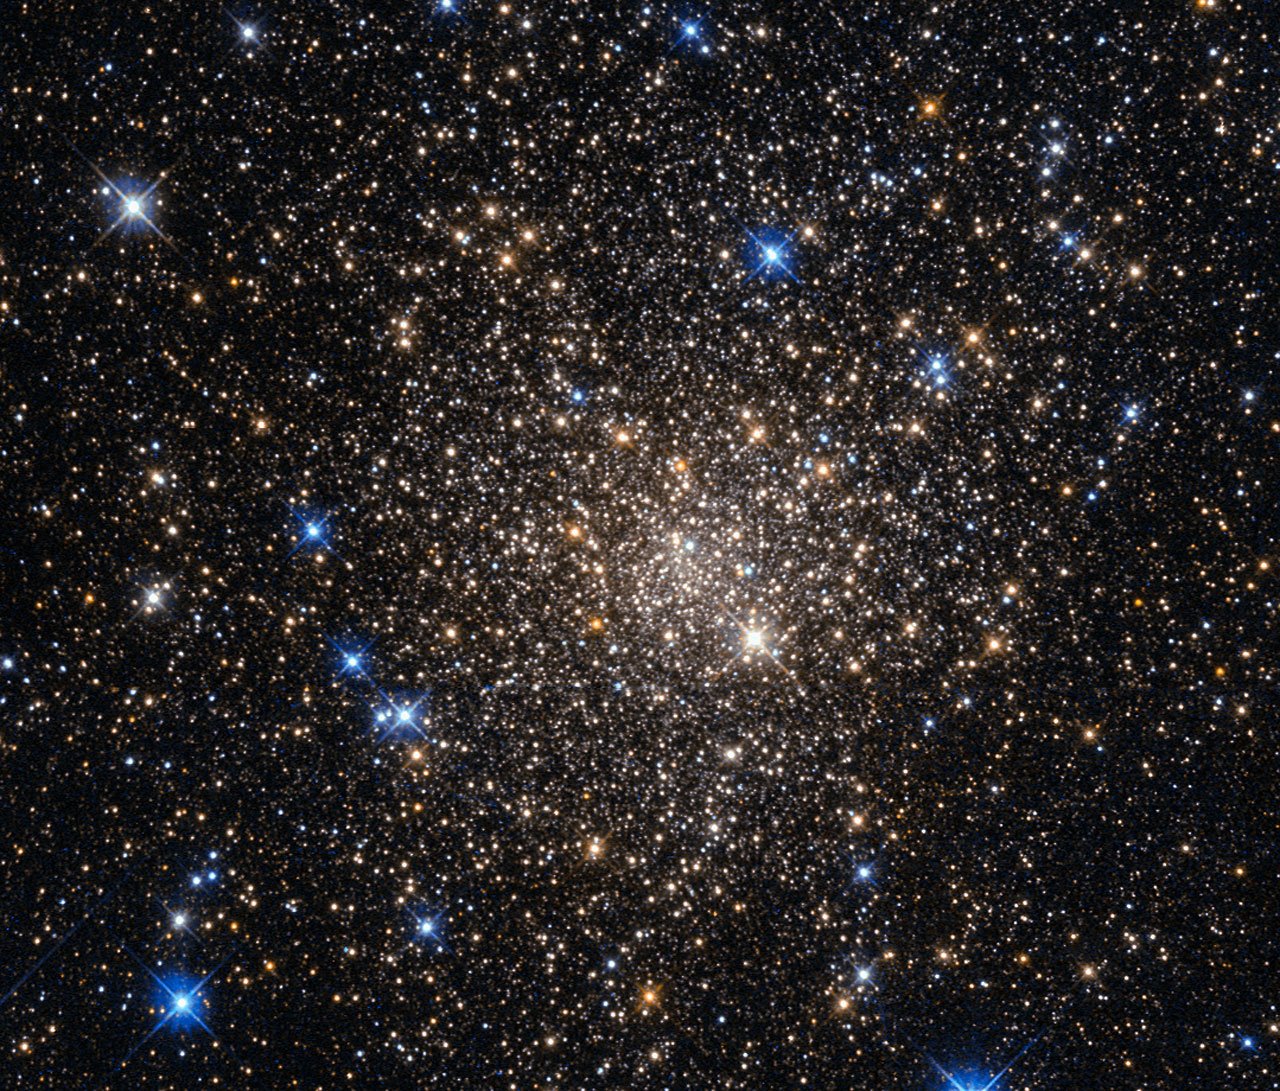 Picture: Hubble Examines a Dwelling Place for Aging Stars